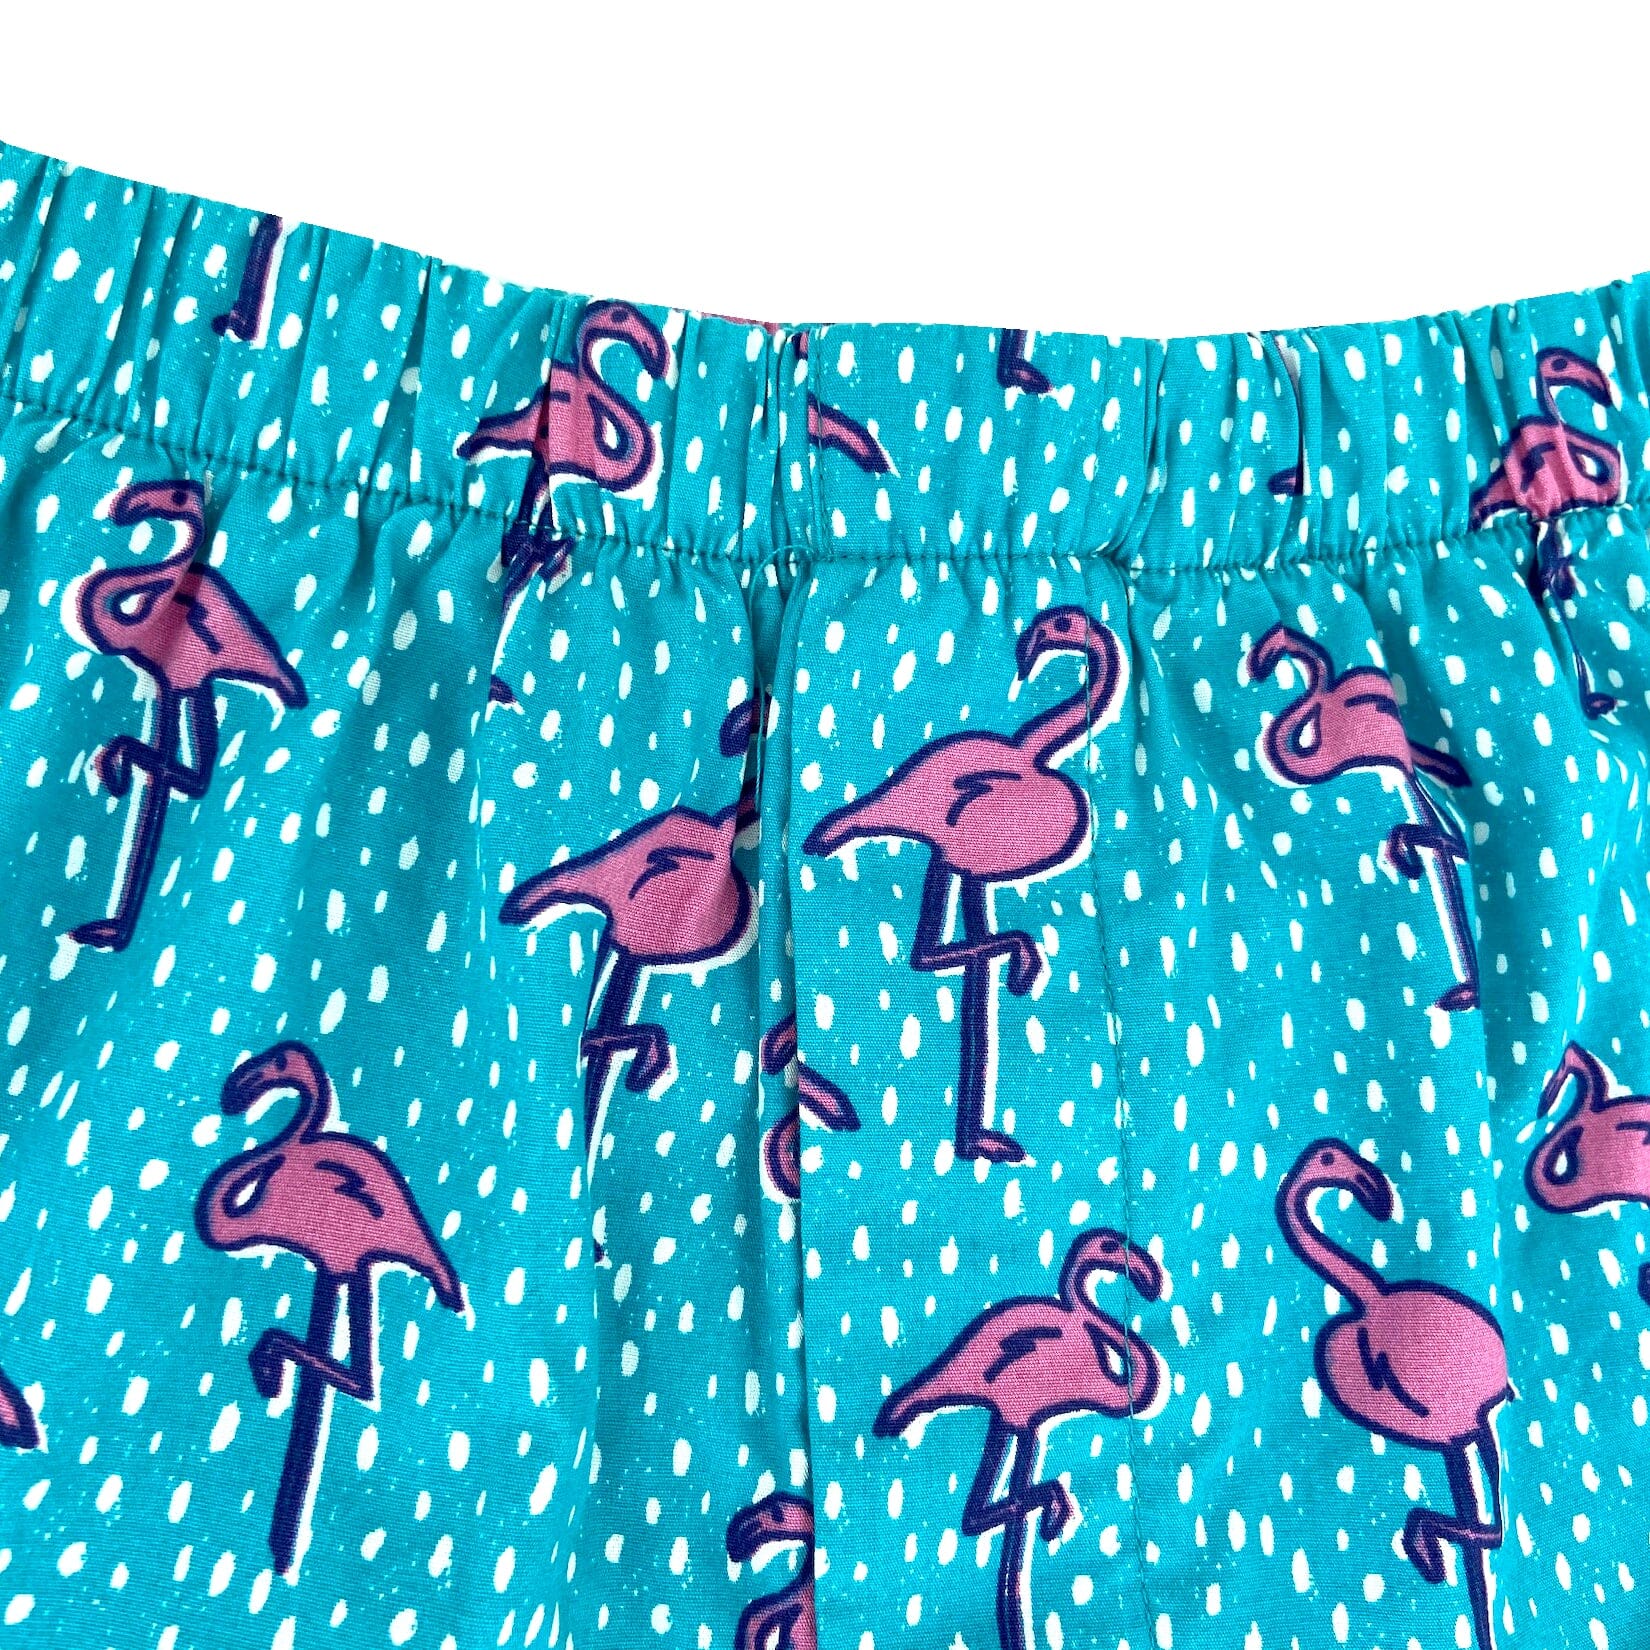 Men's Colorful Flamingo Patterned Boxer Shorts Underwear in Blue